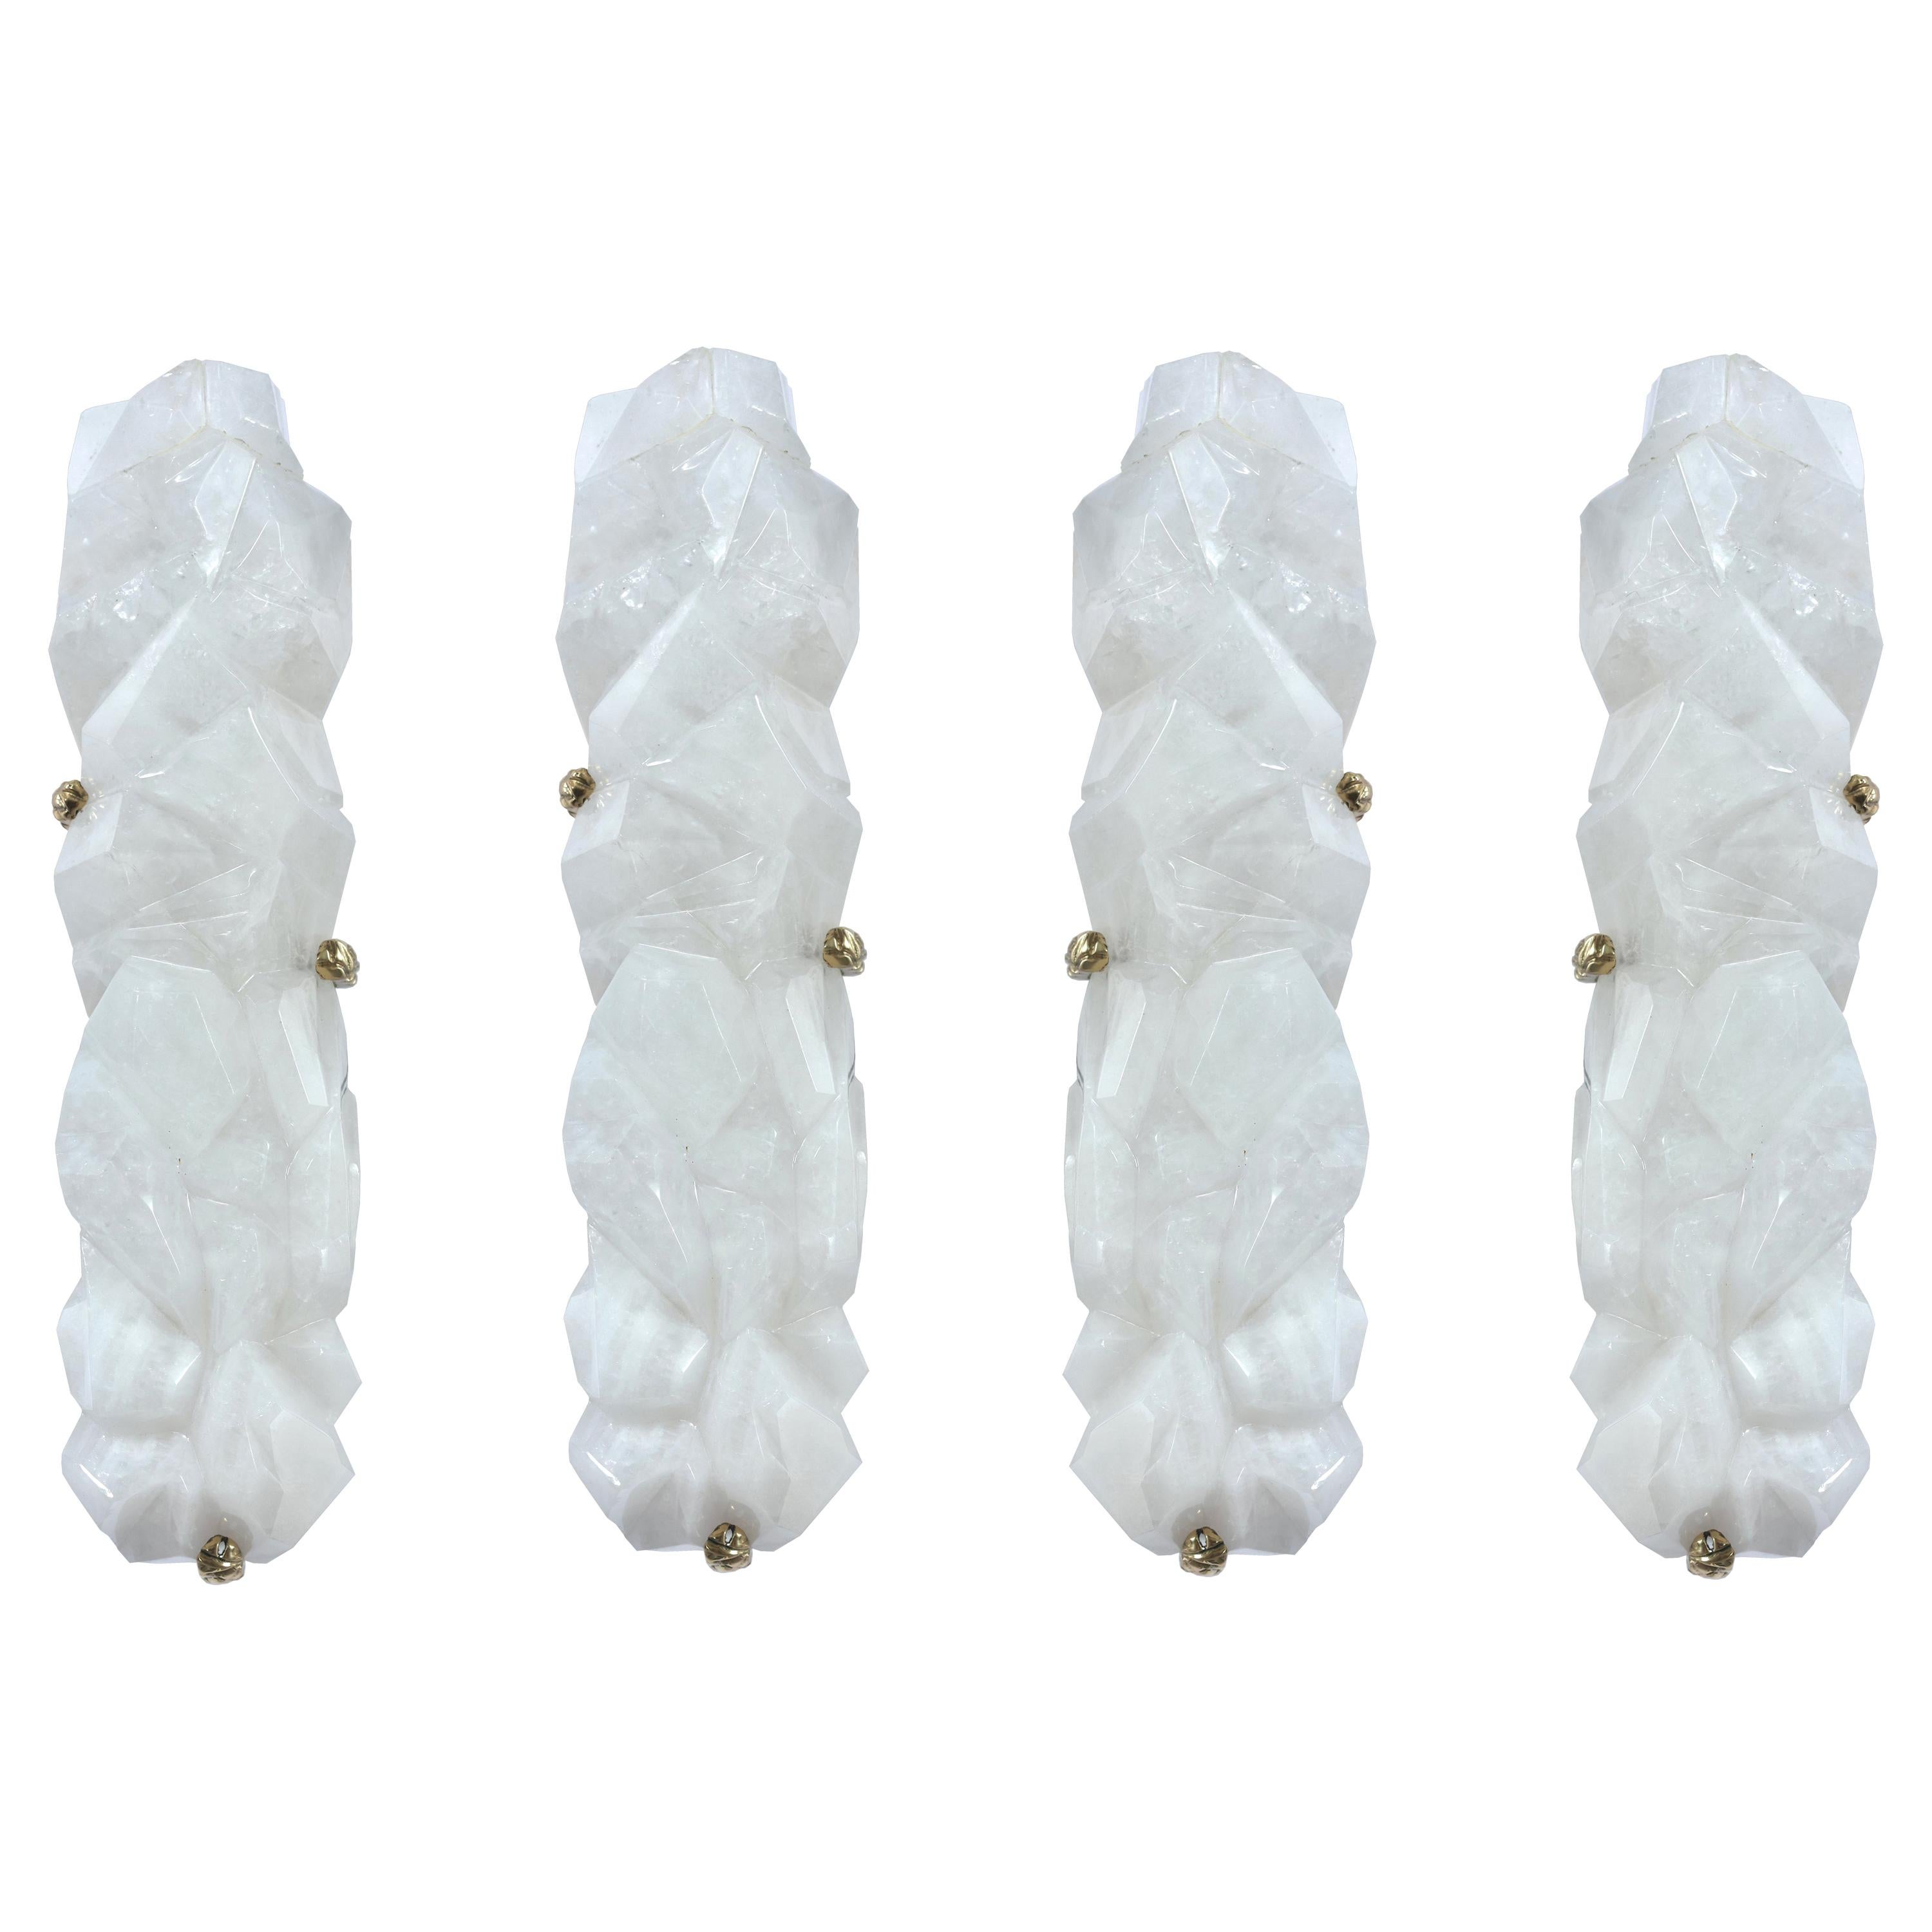 Group of Four Multifaceted Rock Crystal Sconces by Phoenix